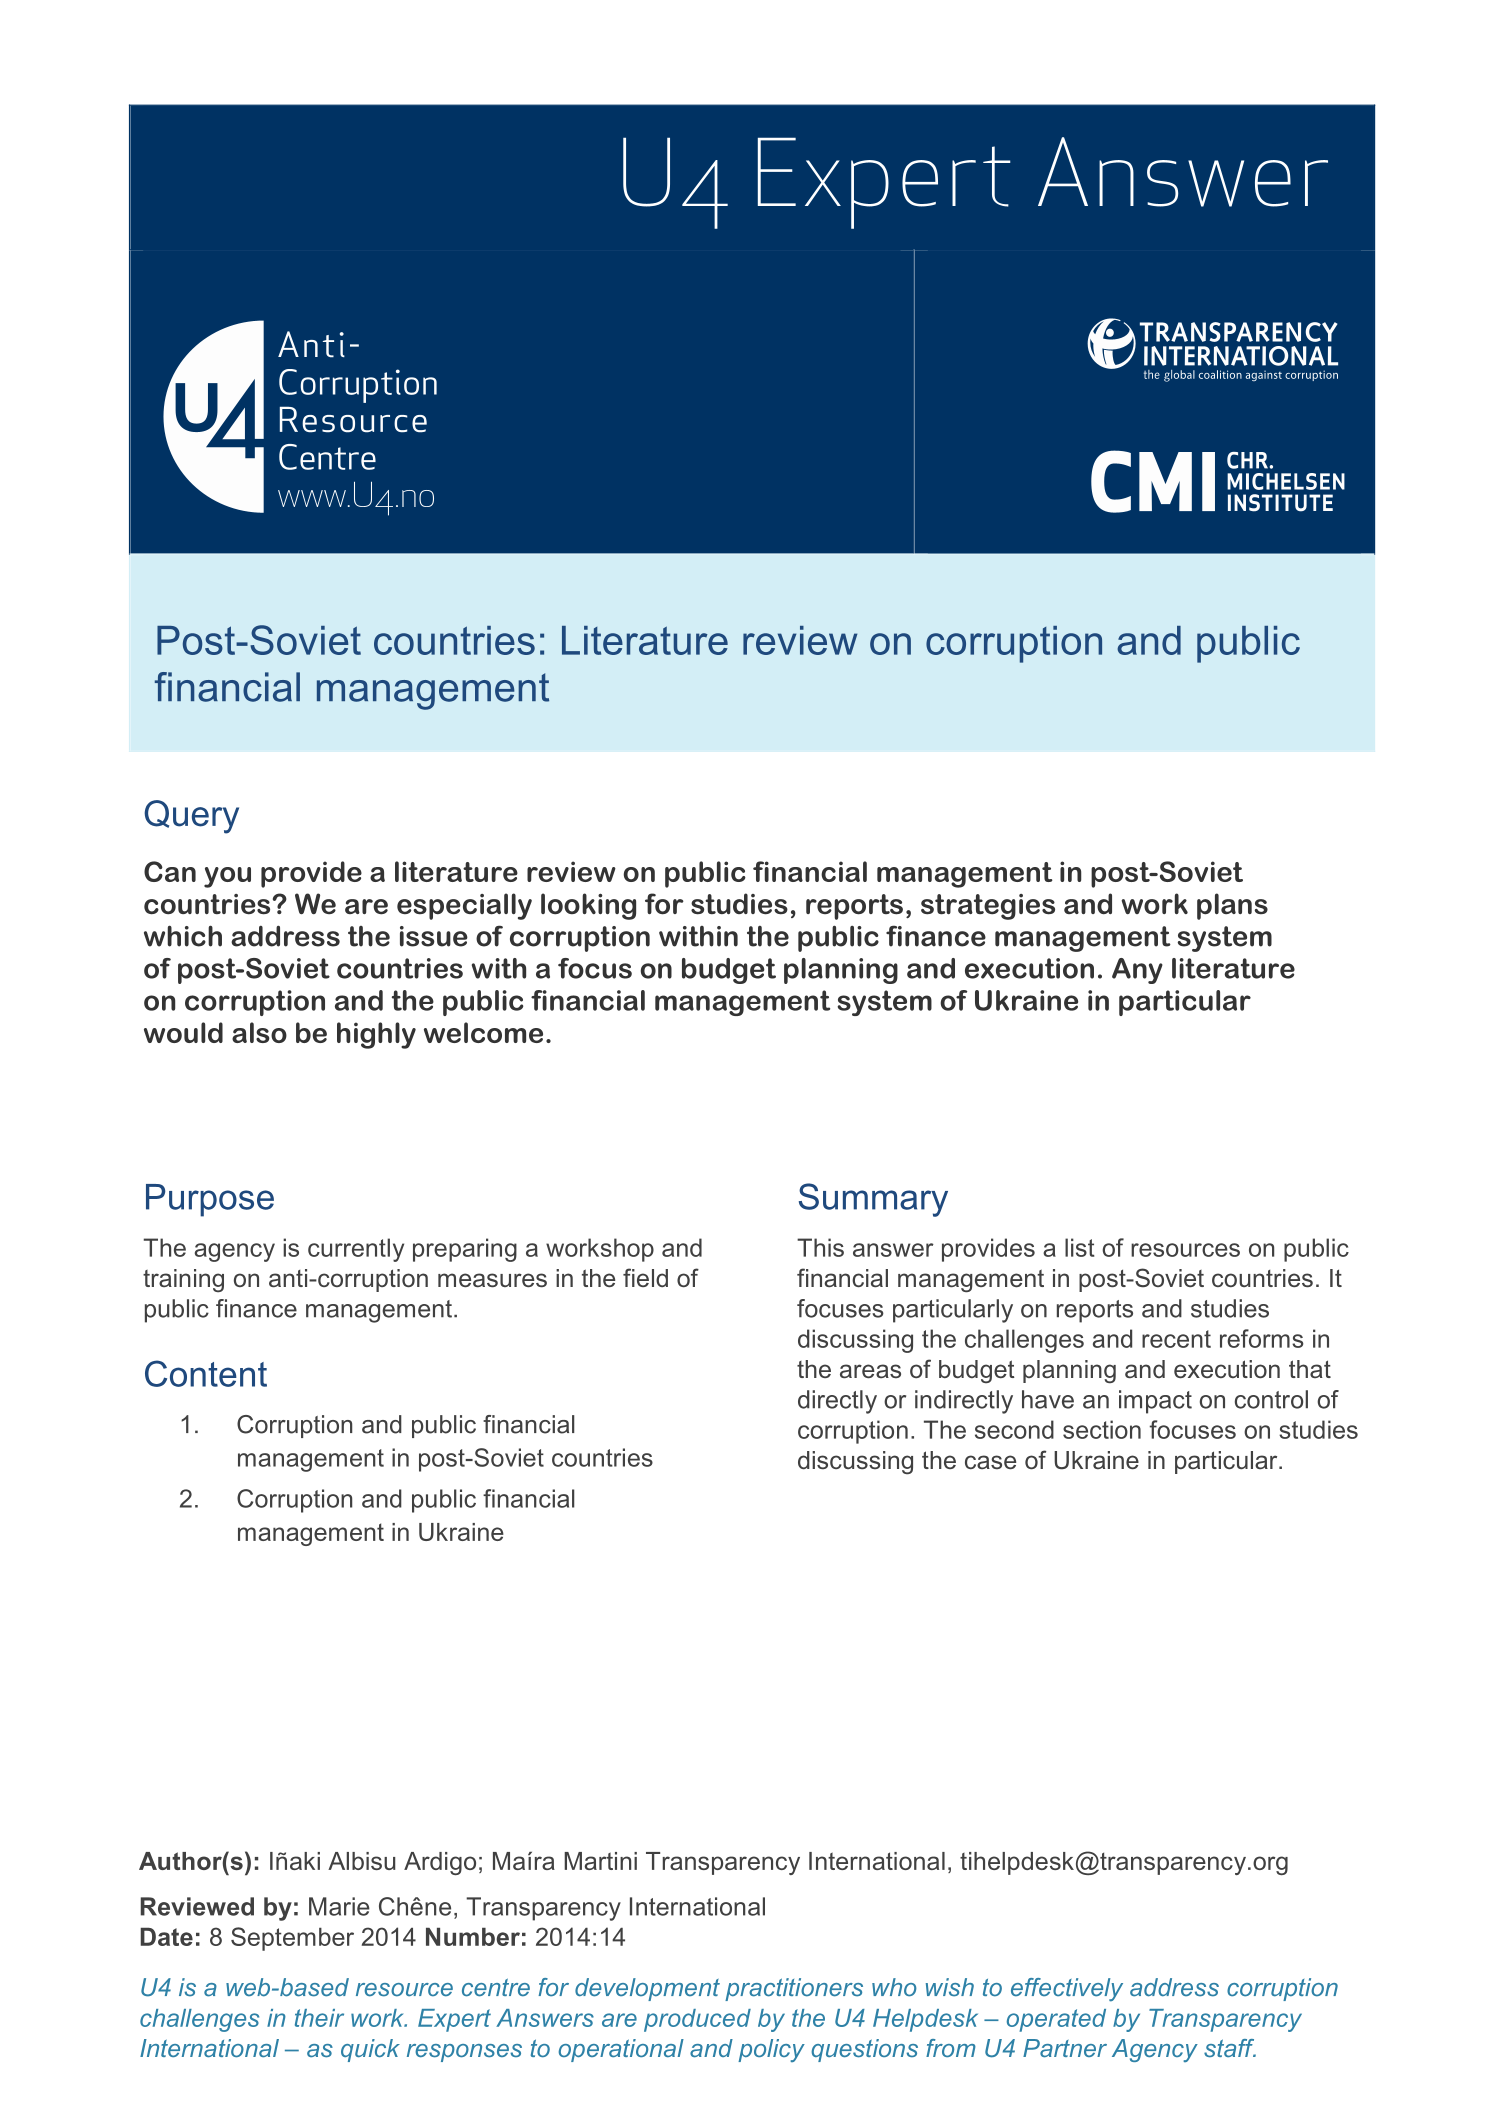 Post-Soviet countries: Literature review on corruption and public financial management 